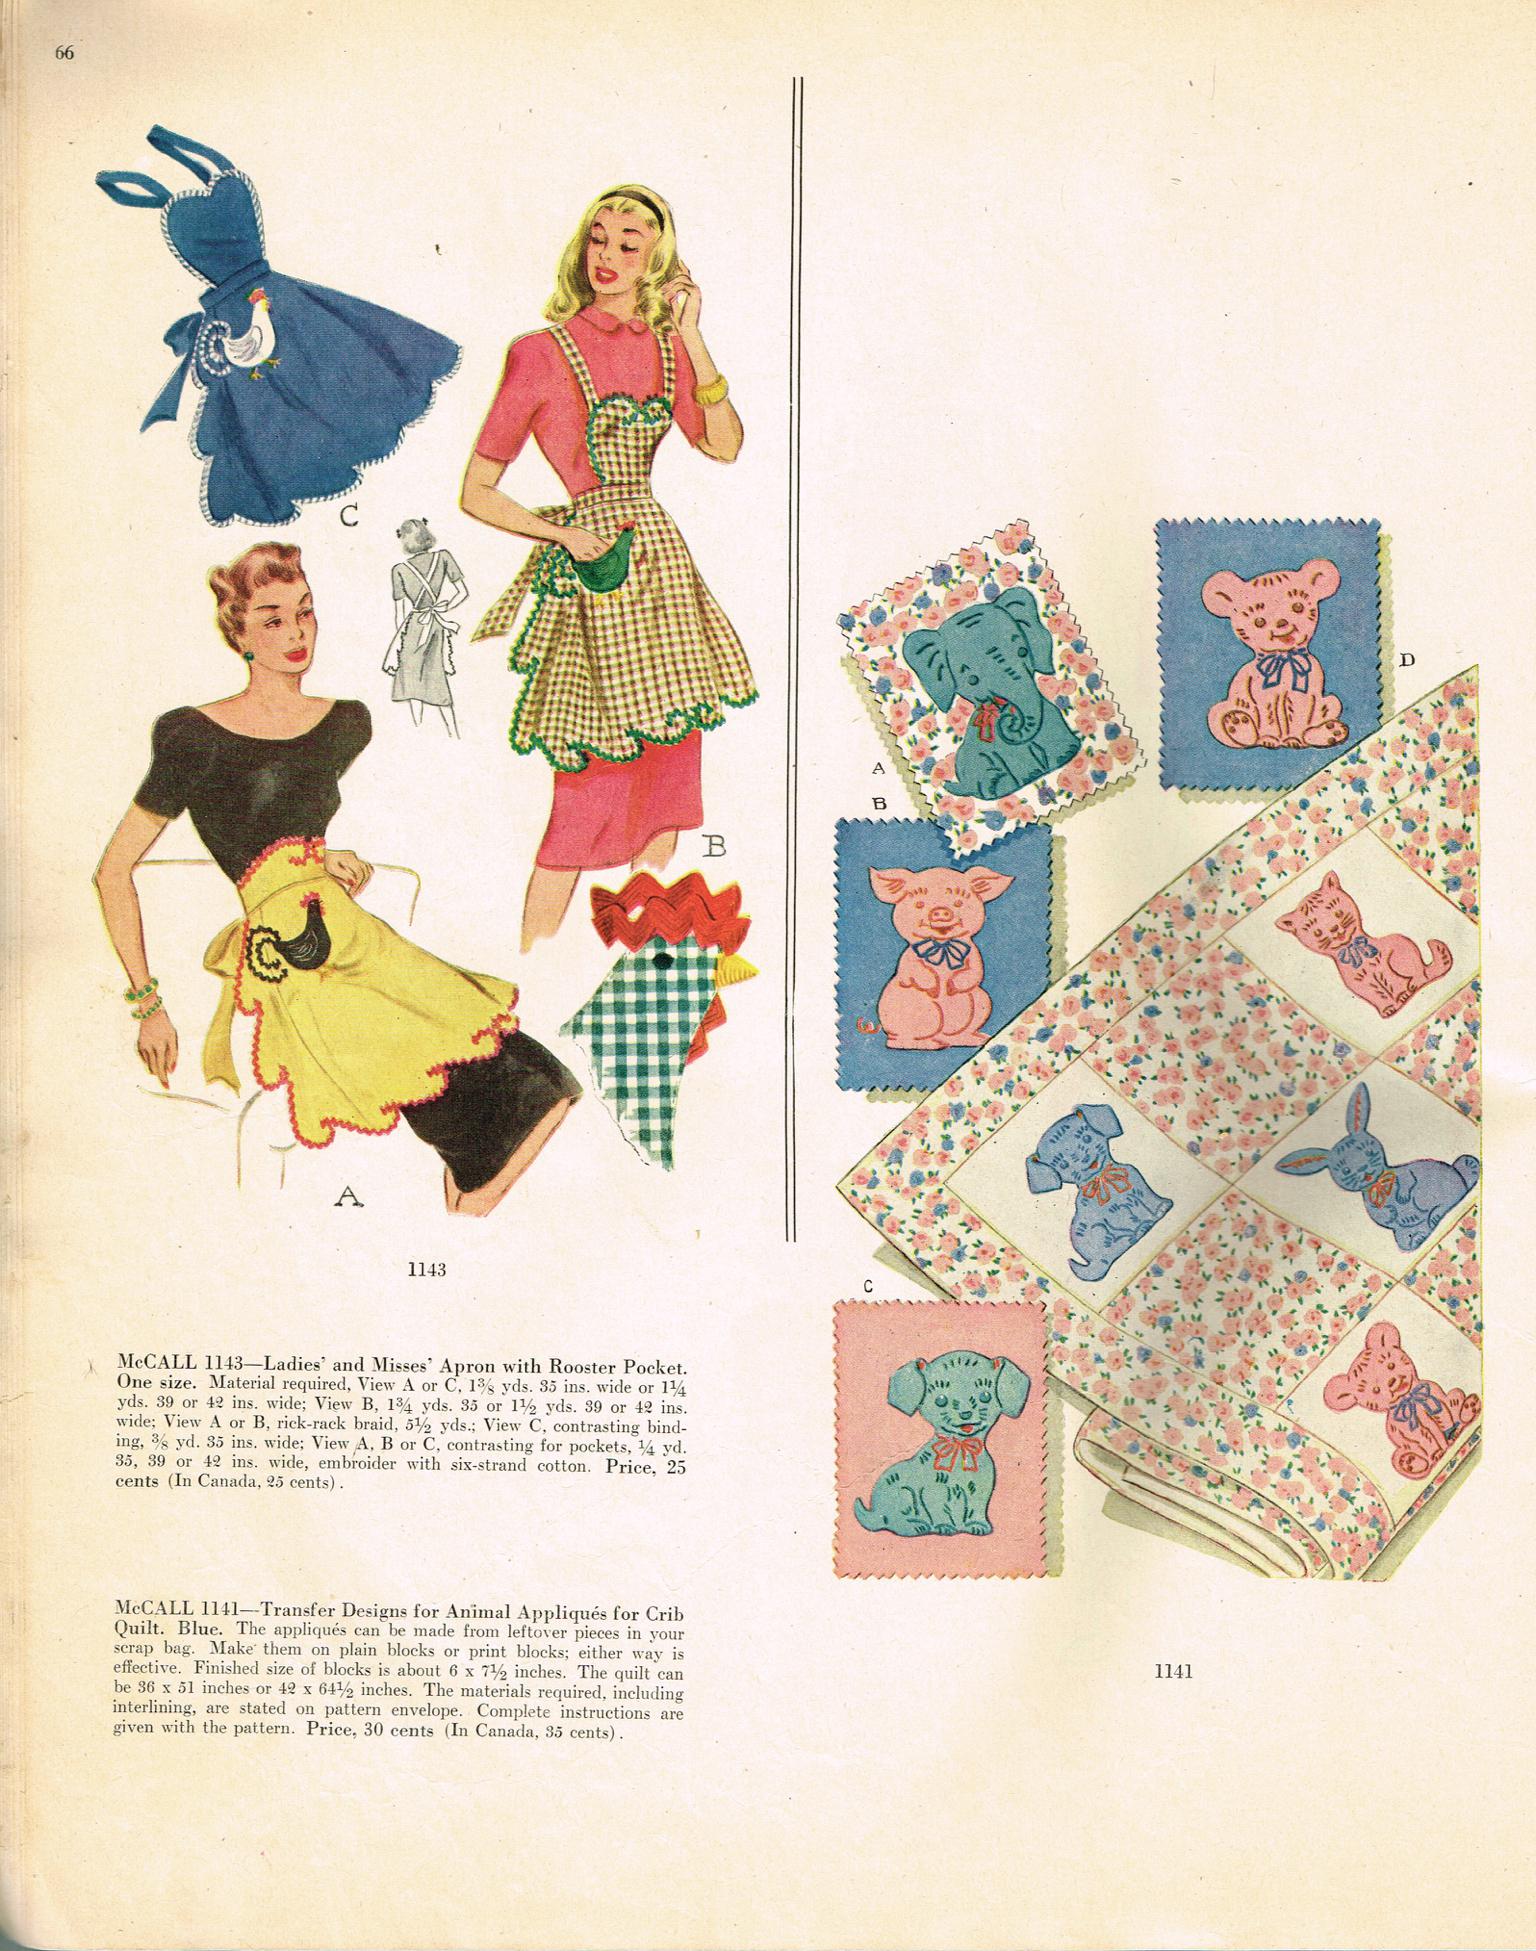 Vintage Mccall's Patterns Notebook Collection [Book]